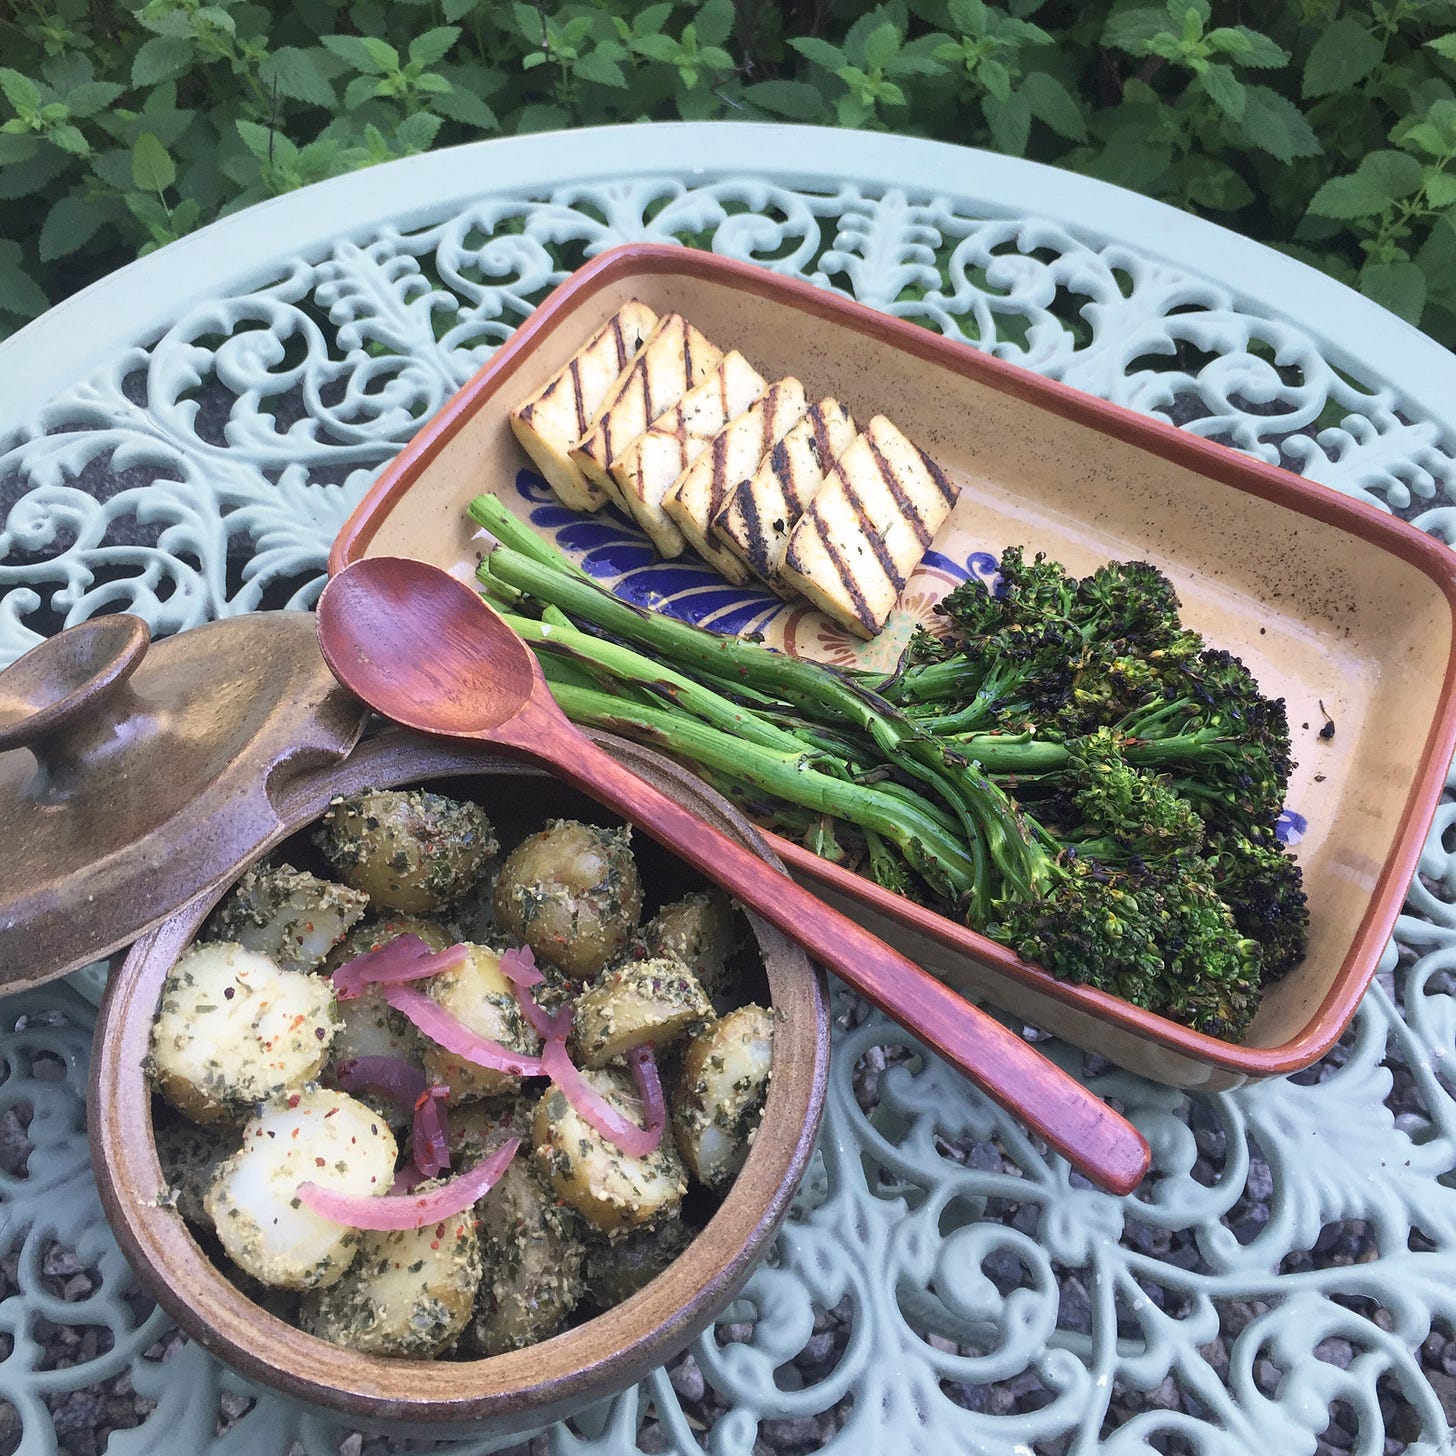 On a wrought-iron outdoor table, two stone dishes: a round tureen with pesto potato salad with pickled onion on top, and a rectangular shallow dish with slices of grilled tofu and long pieces of charred broccolini. A spoon rests at the edge of the potatoes.